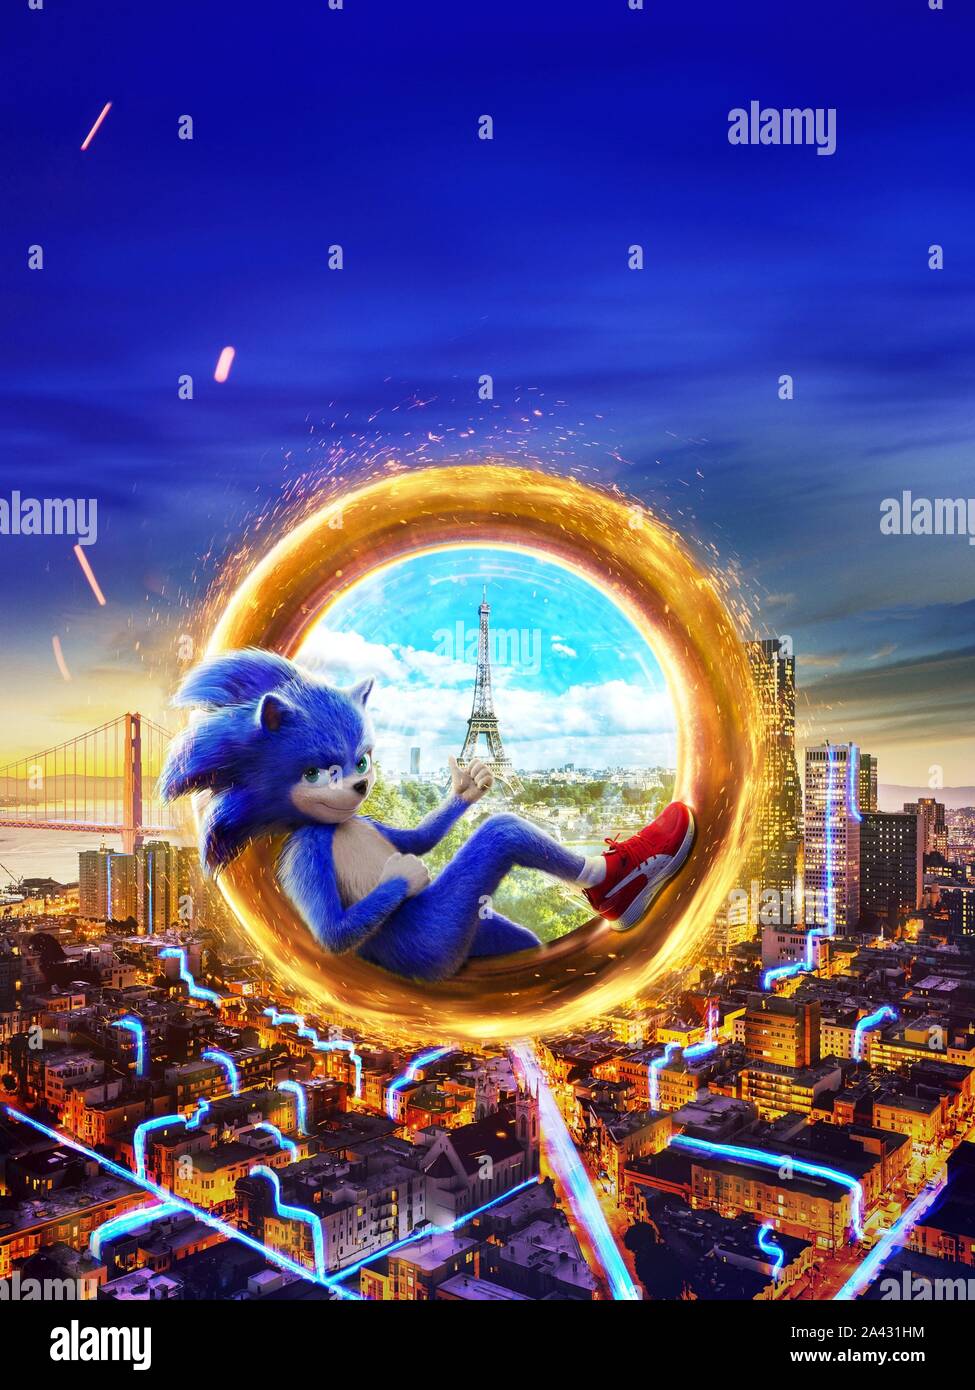 OFFICIAL PARAMOUNT PICTURES - SONIC MOVIE on Behance